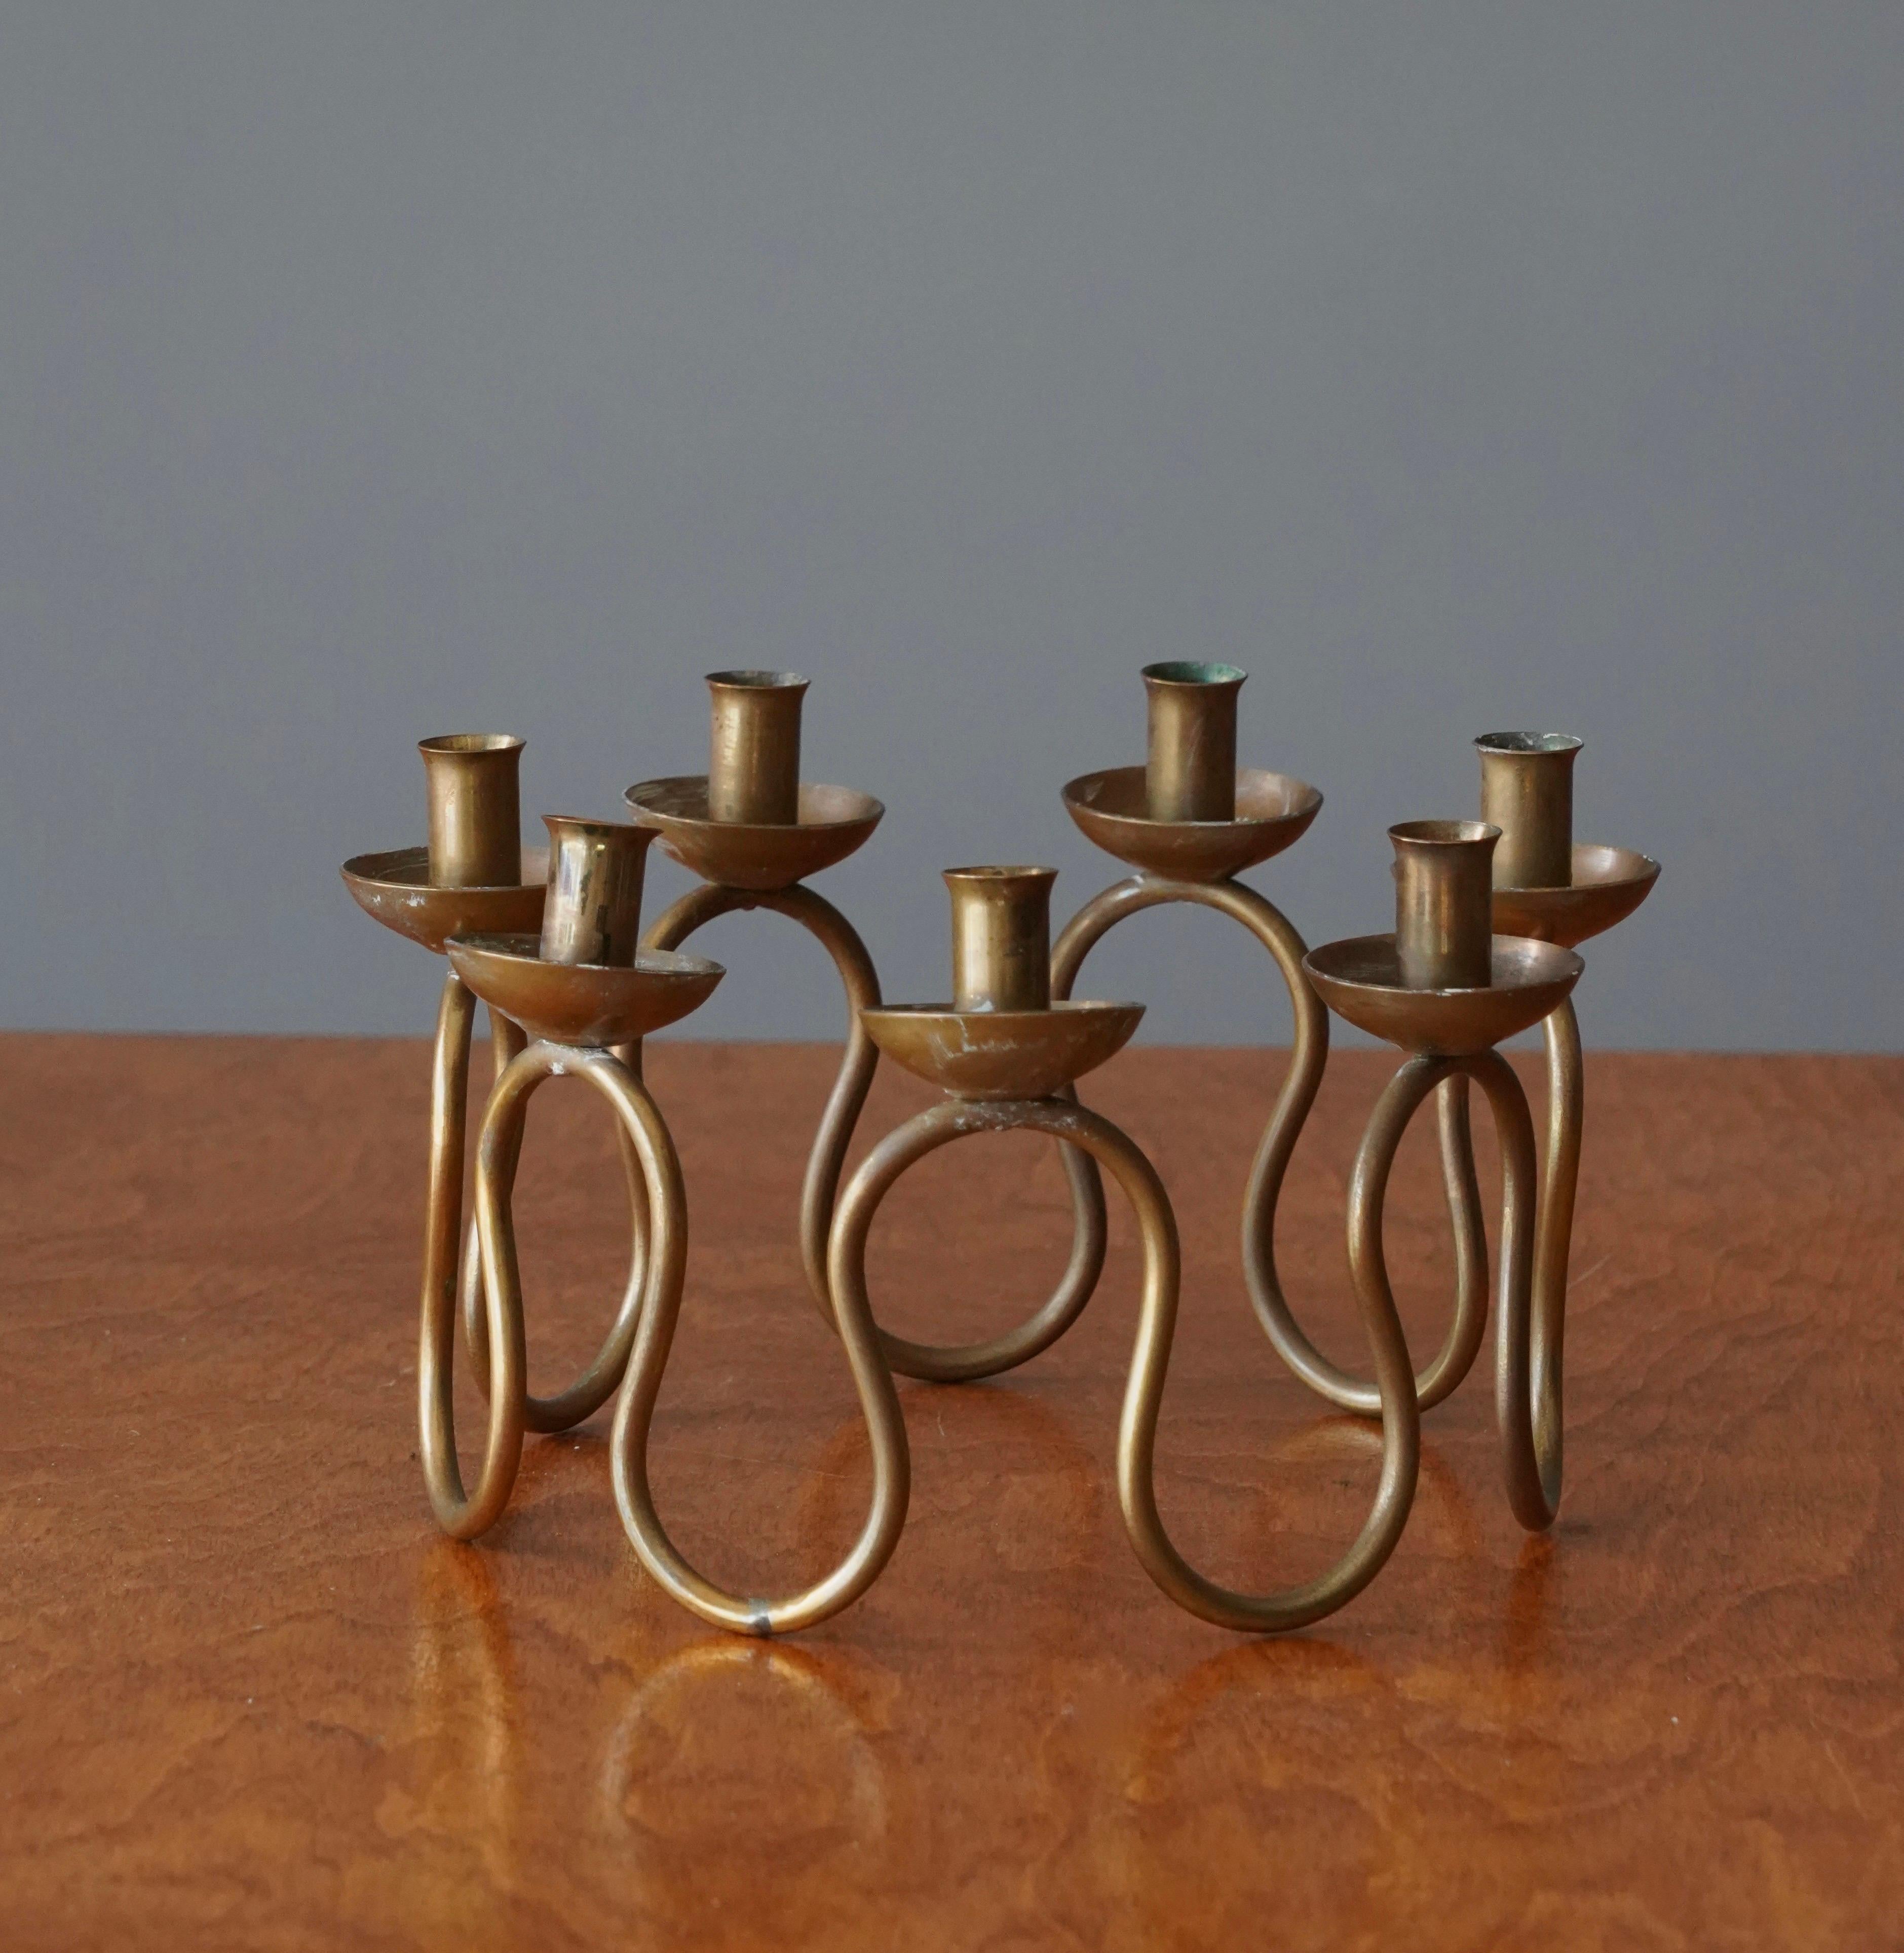 An organic candelabra, designed by Lars Holmström for Svenskt Tenn, Sweden, 1950s. In brass. For small candles. Accepts 0.5 inch diameter candles

Other designers of the period include Piet Hein, Paavo Tynell, Josef Frank, and Jean Royere.

